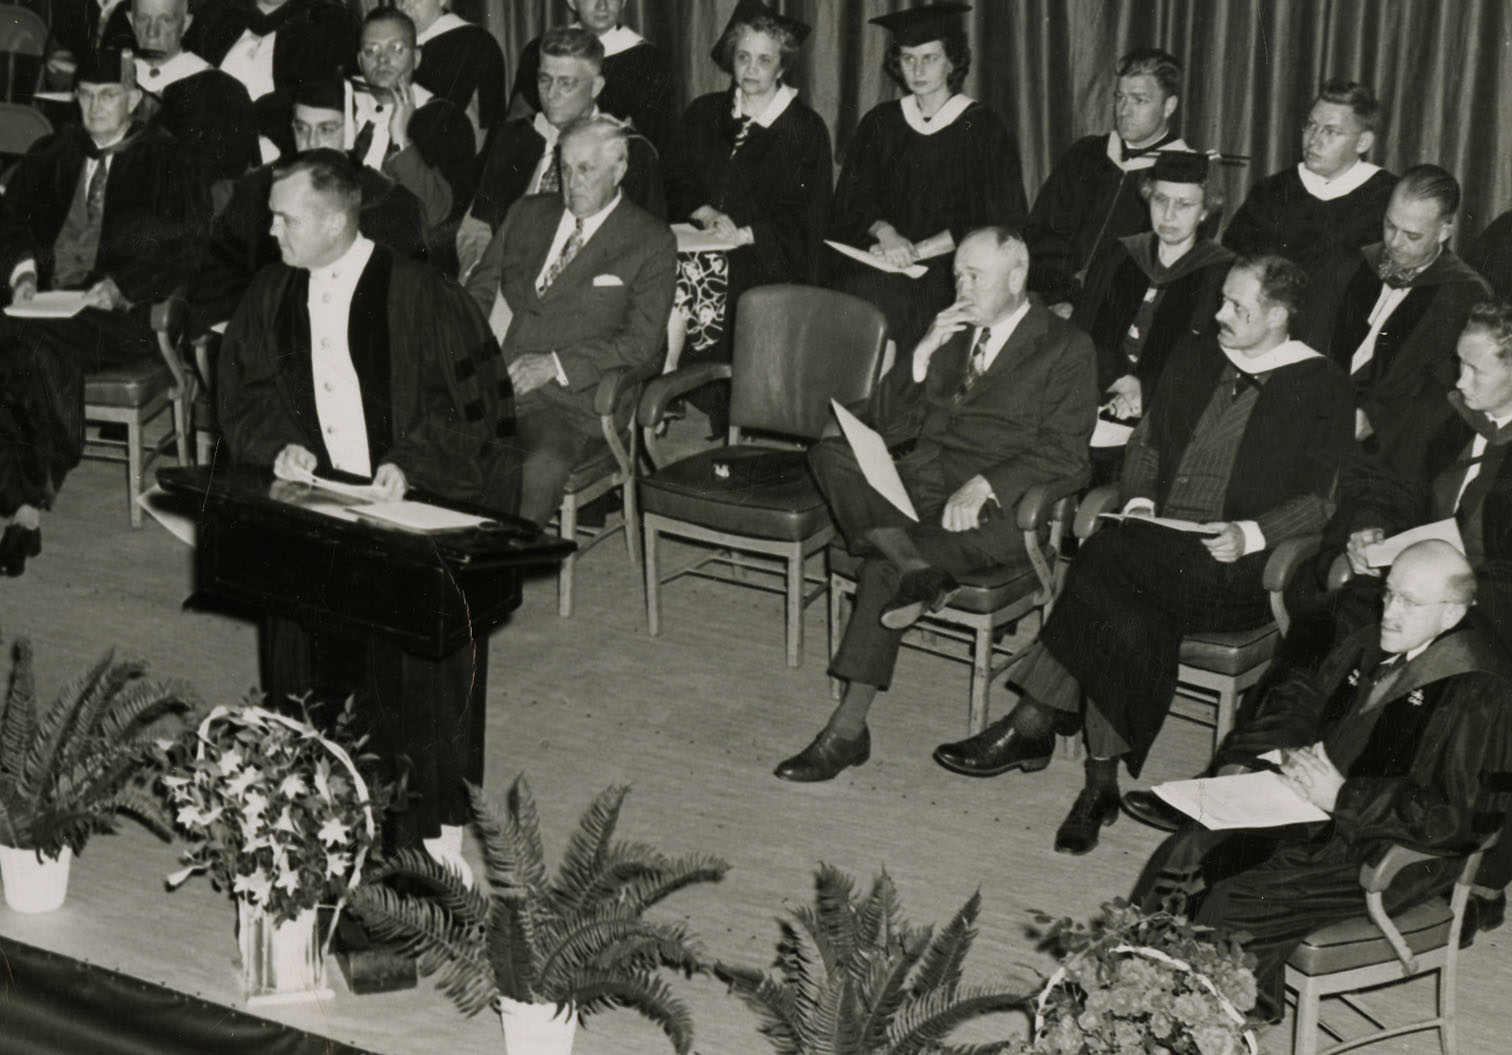 William J. Wallace delivering speech